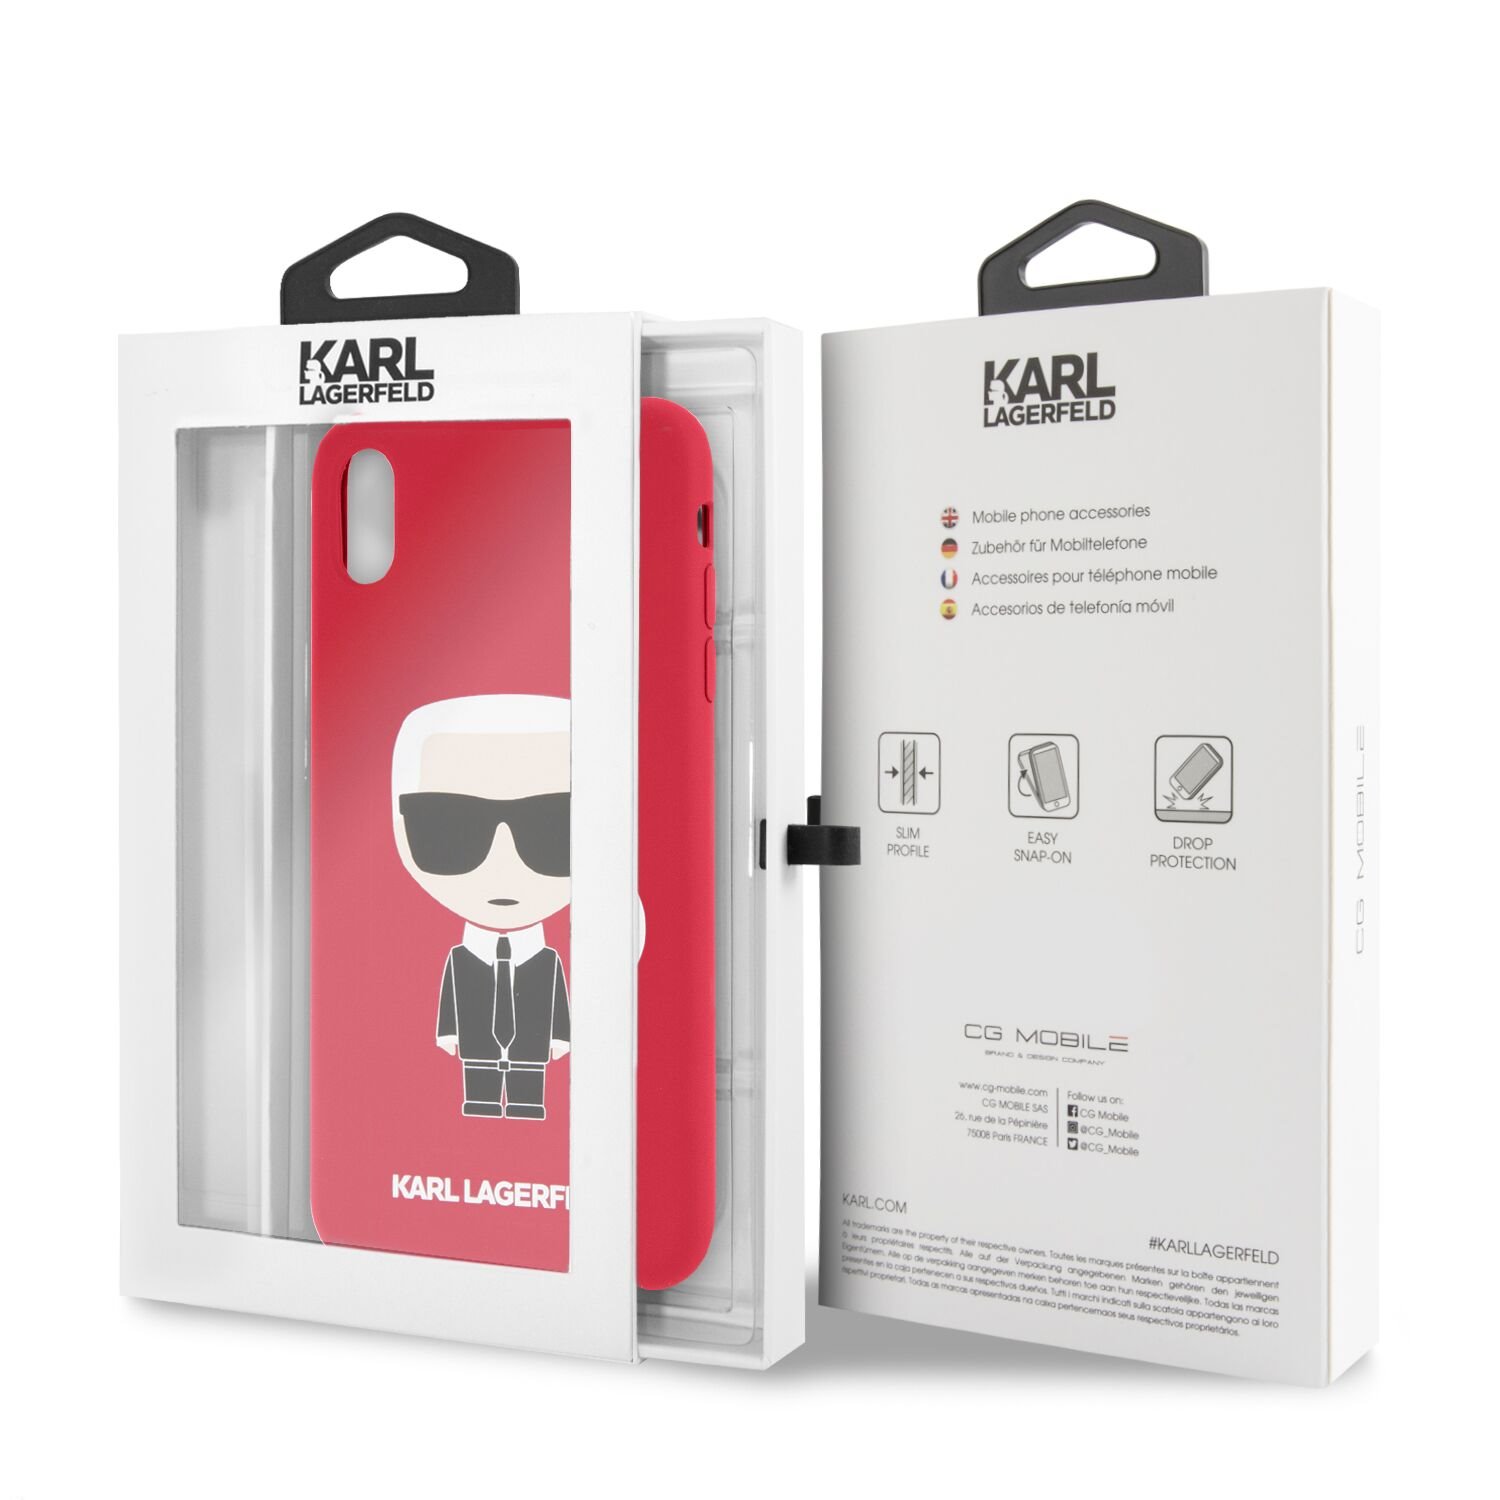 Silikónové puzdro Karl Lagerfeld Full Body Iconic Apple iPhone XS Max, red